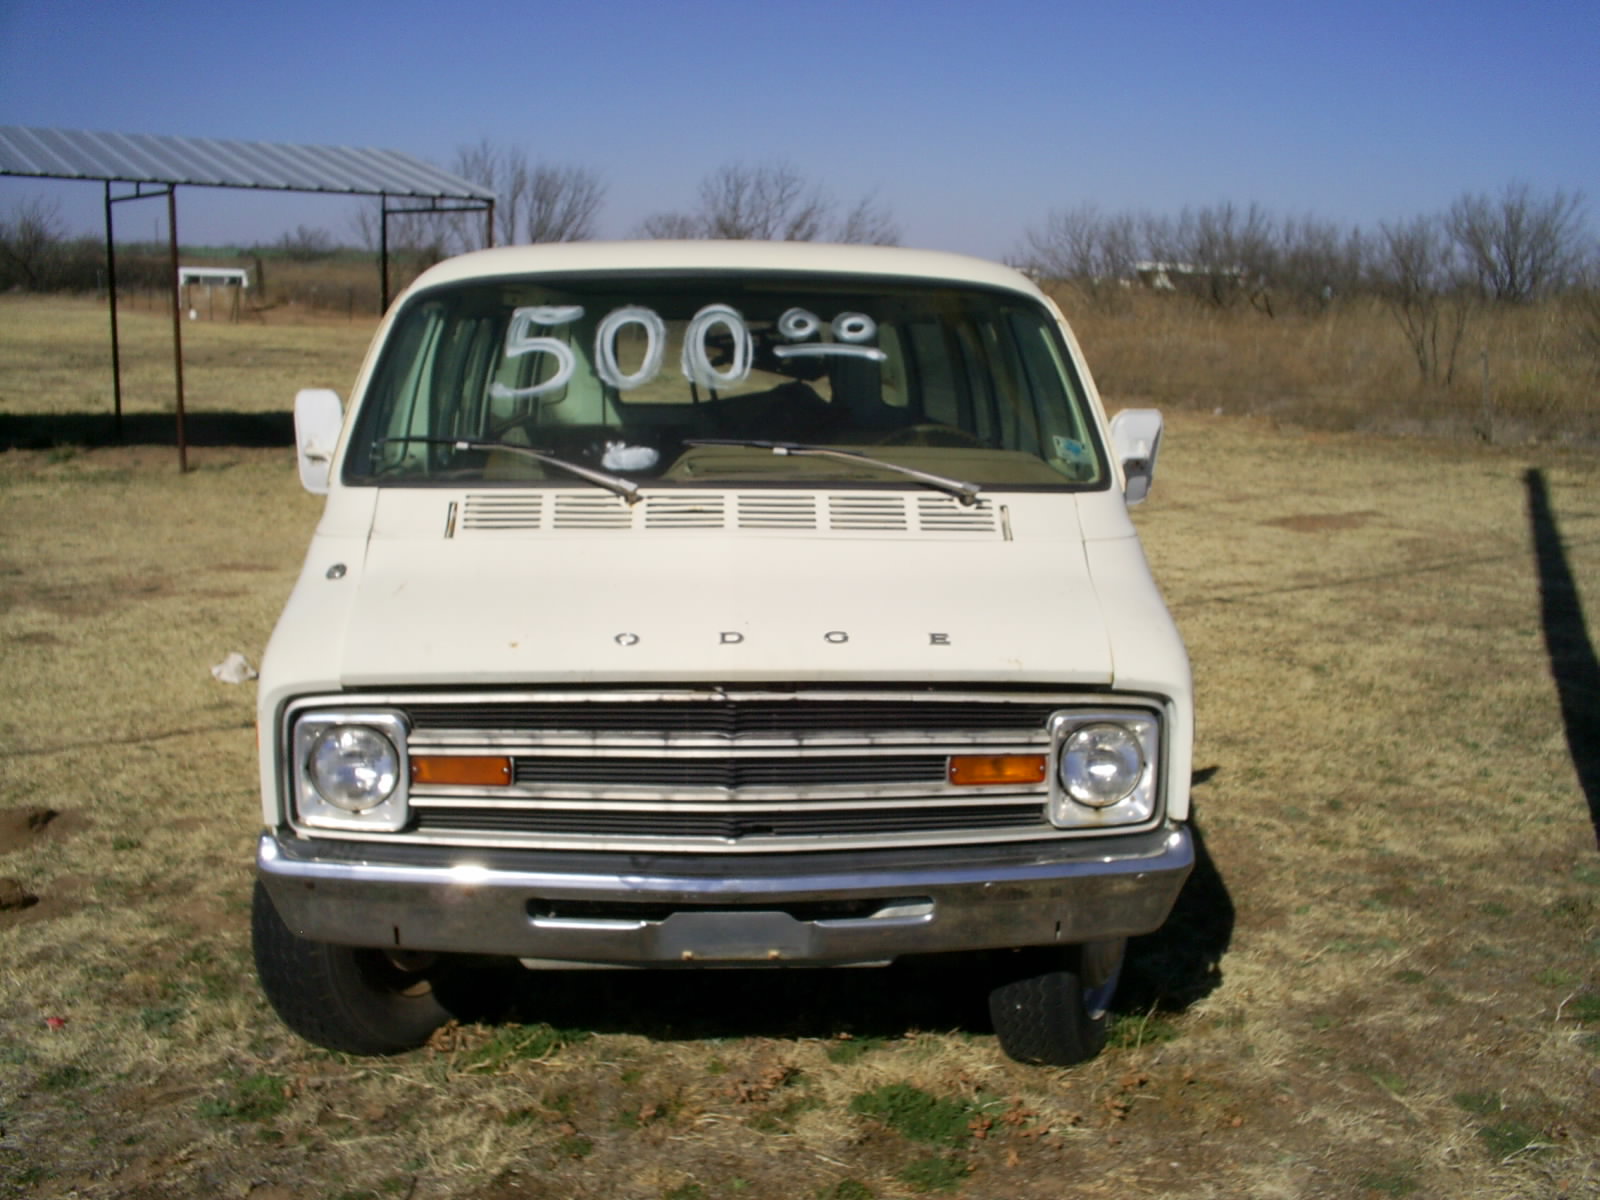 Late 1970's Dodge Van. It is probably from around 1978 or 1979.